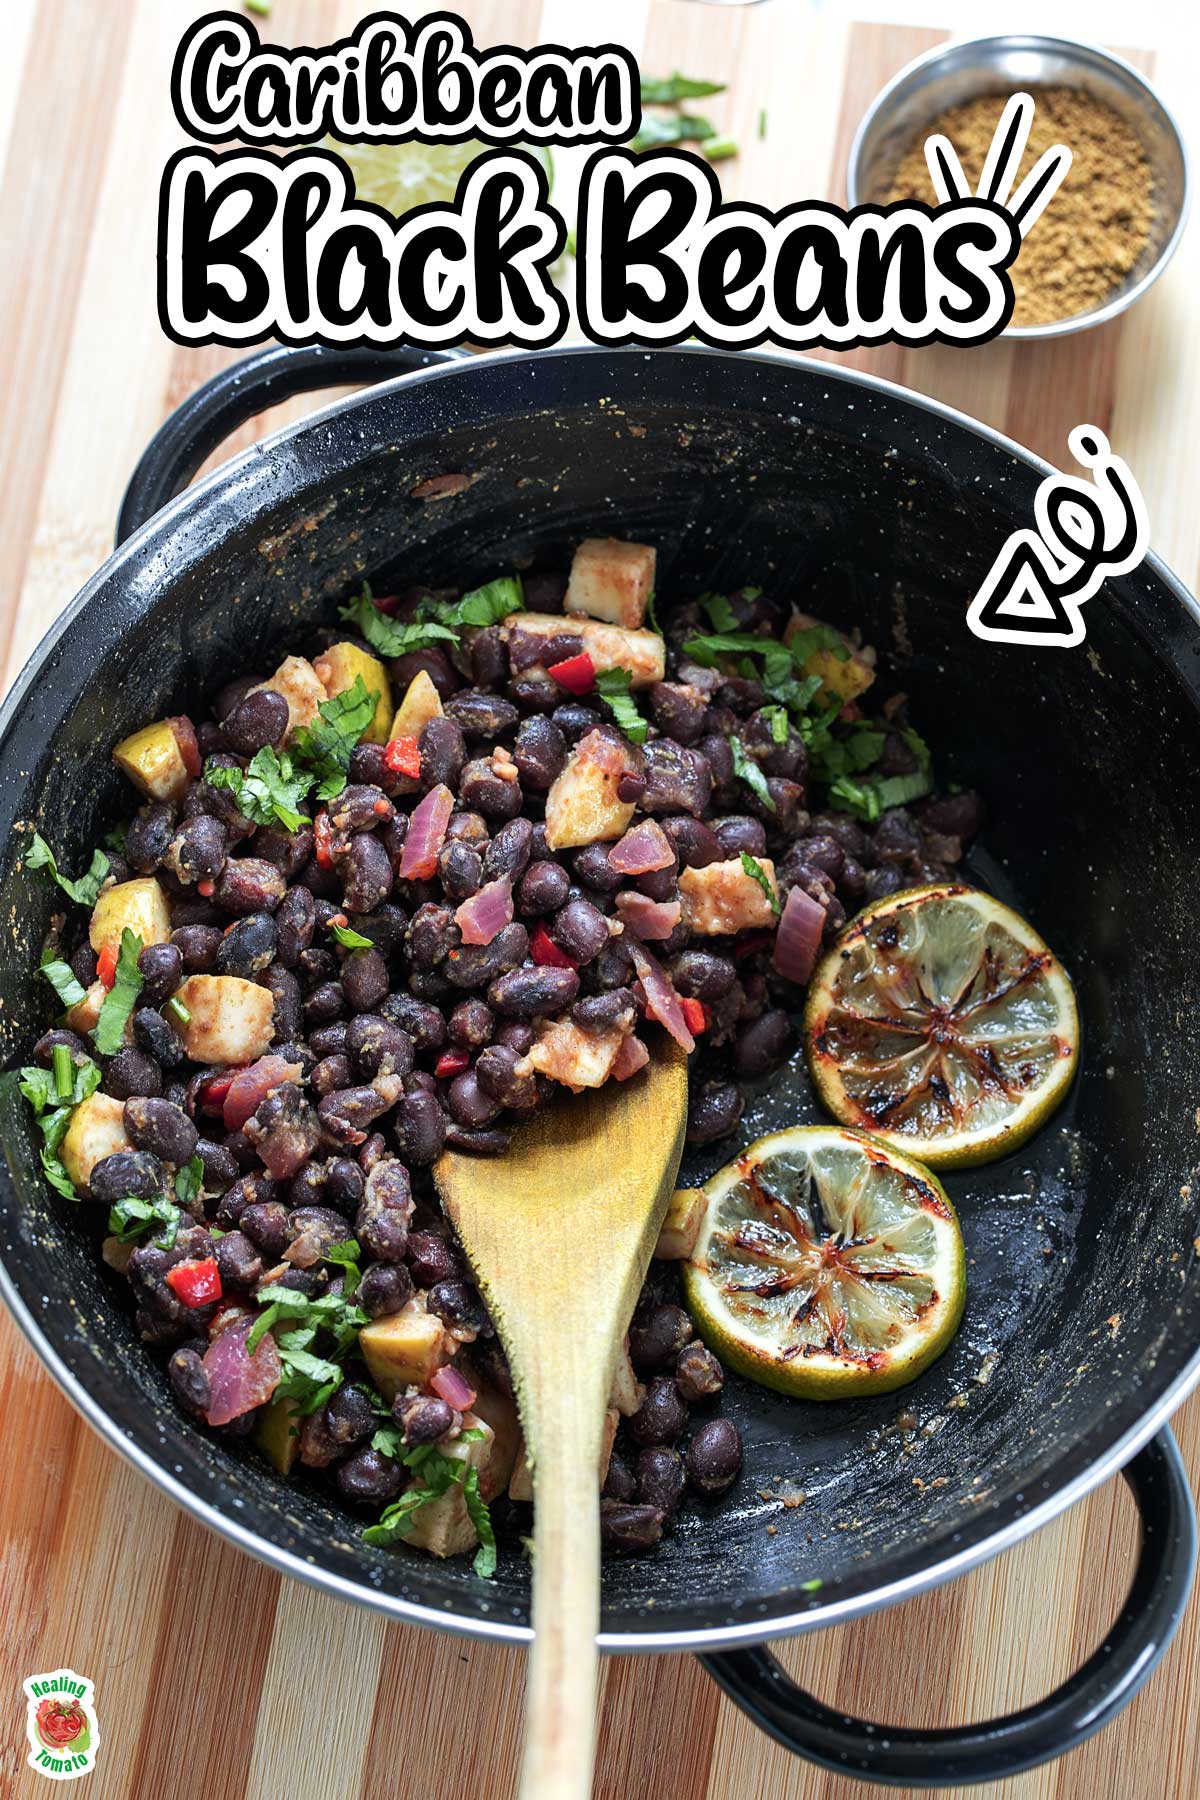 Top view of the beans in a black skillet. A wooden serving spoon is in it with a side of charred lime slices.